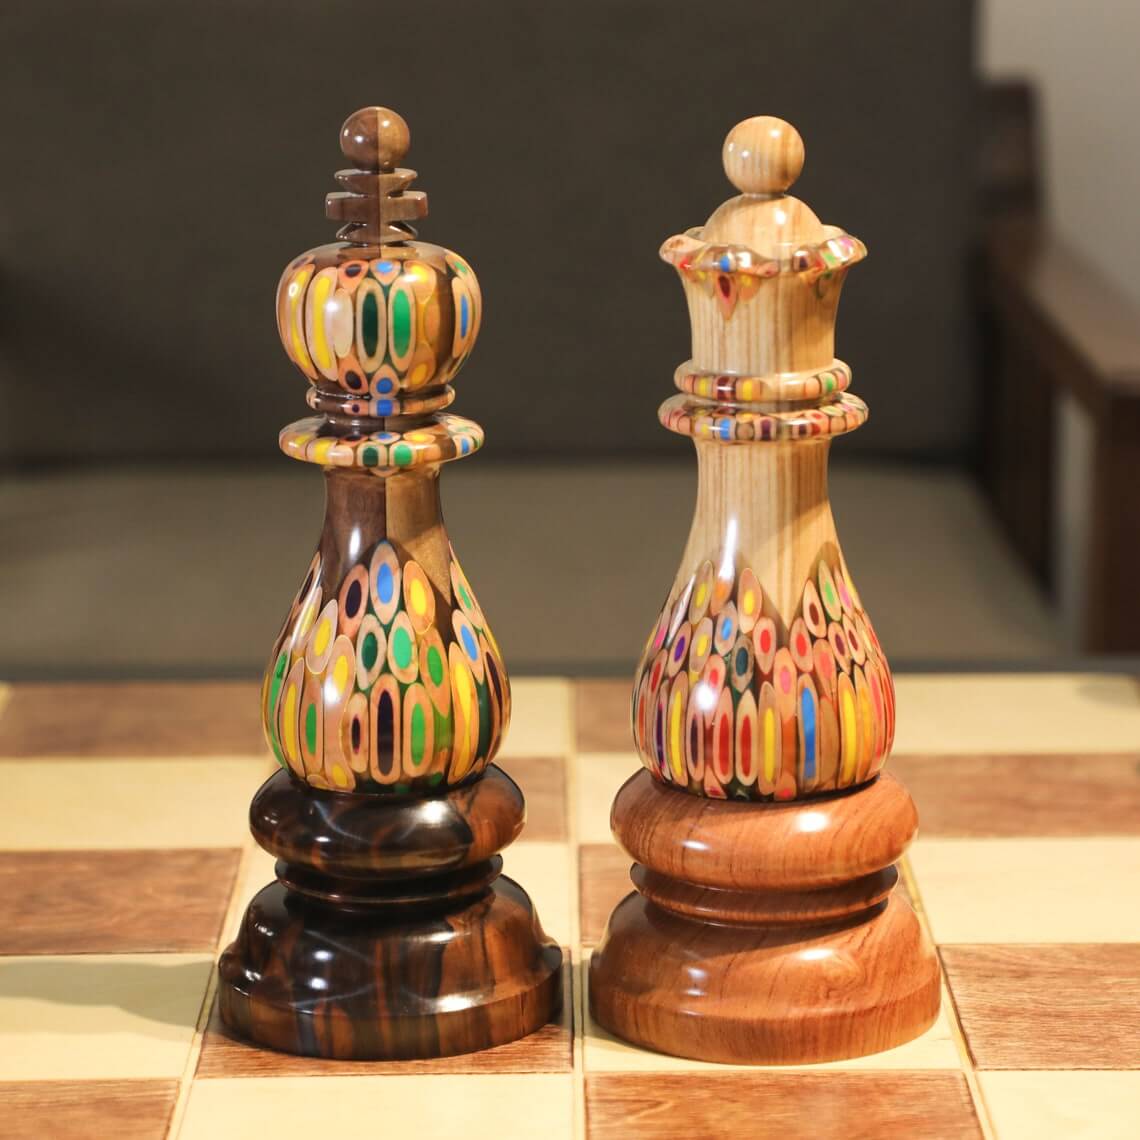 Full Set Giant Deluxe Chess Pieces with Board - High End Blended